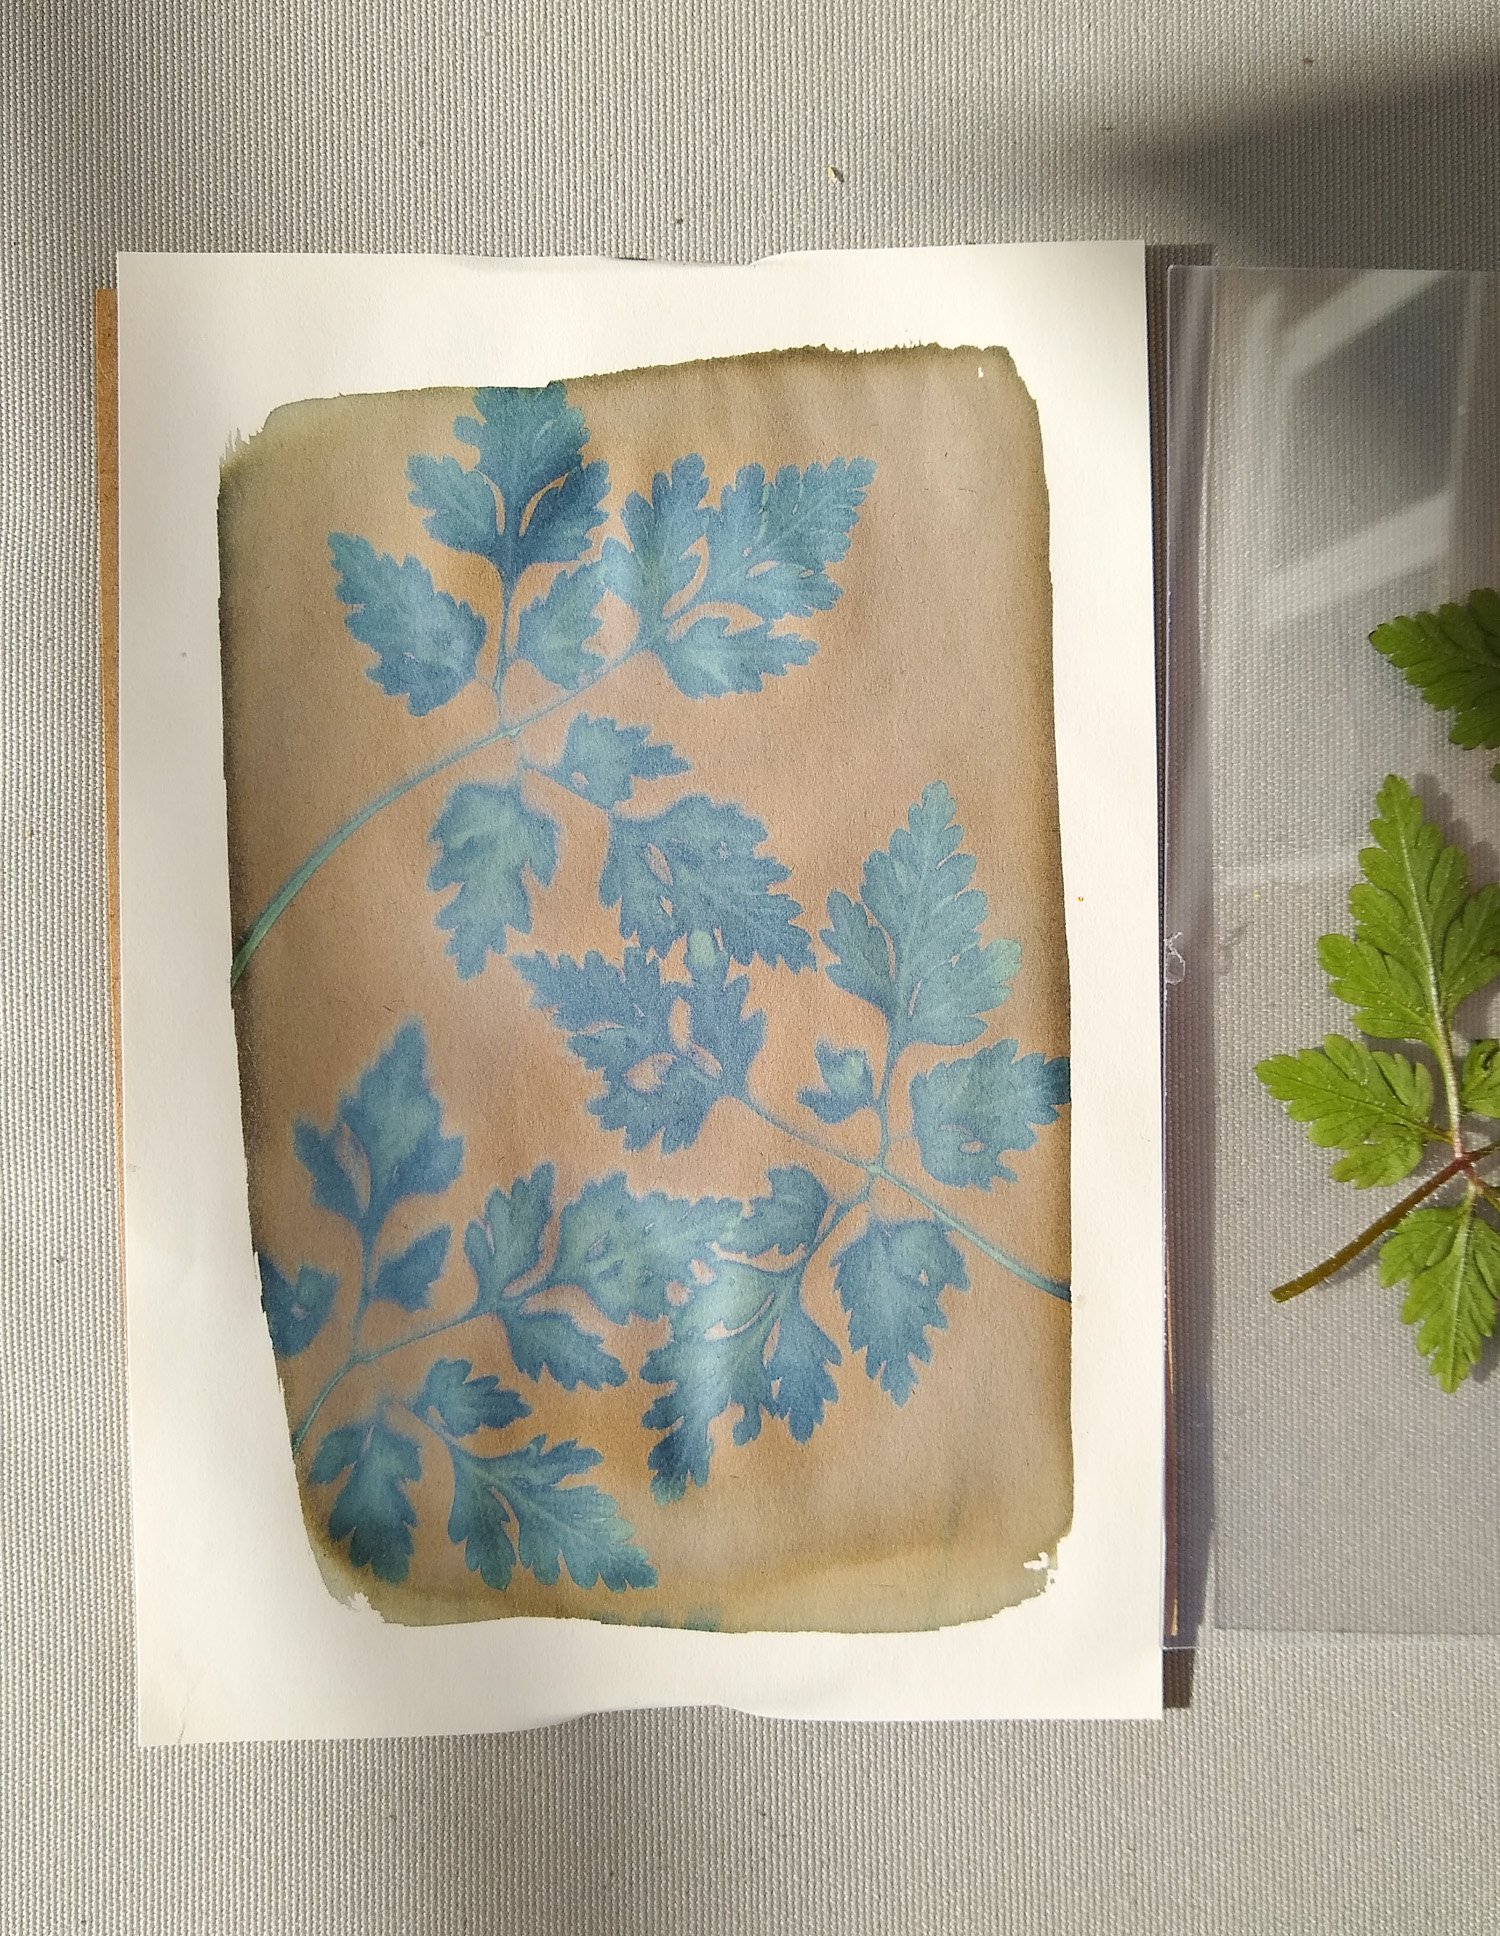 5 simple steps for getting started with Cyanotype printing — Kate Watkins